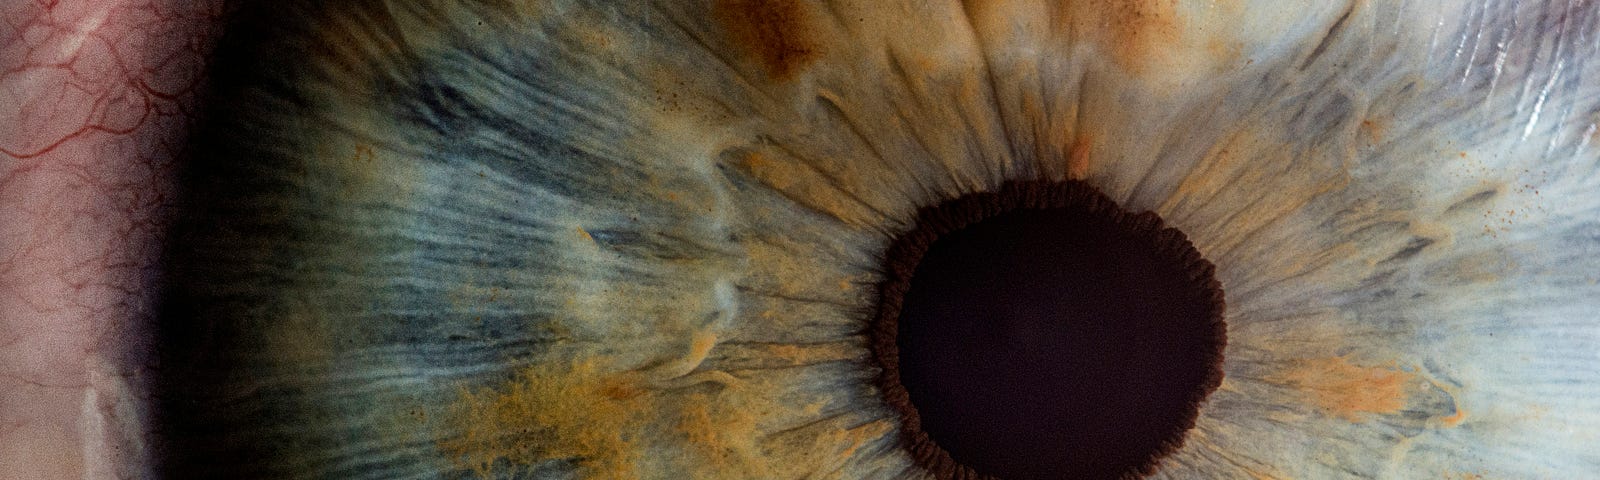 A super close-up of a pale blue and gold eye